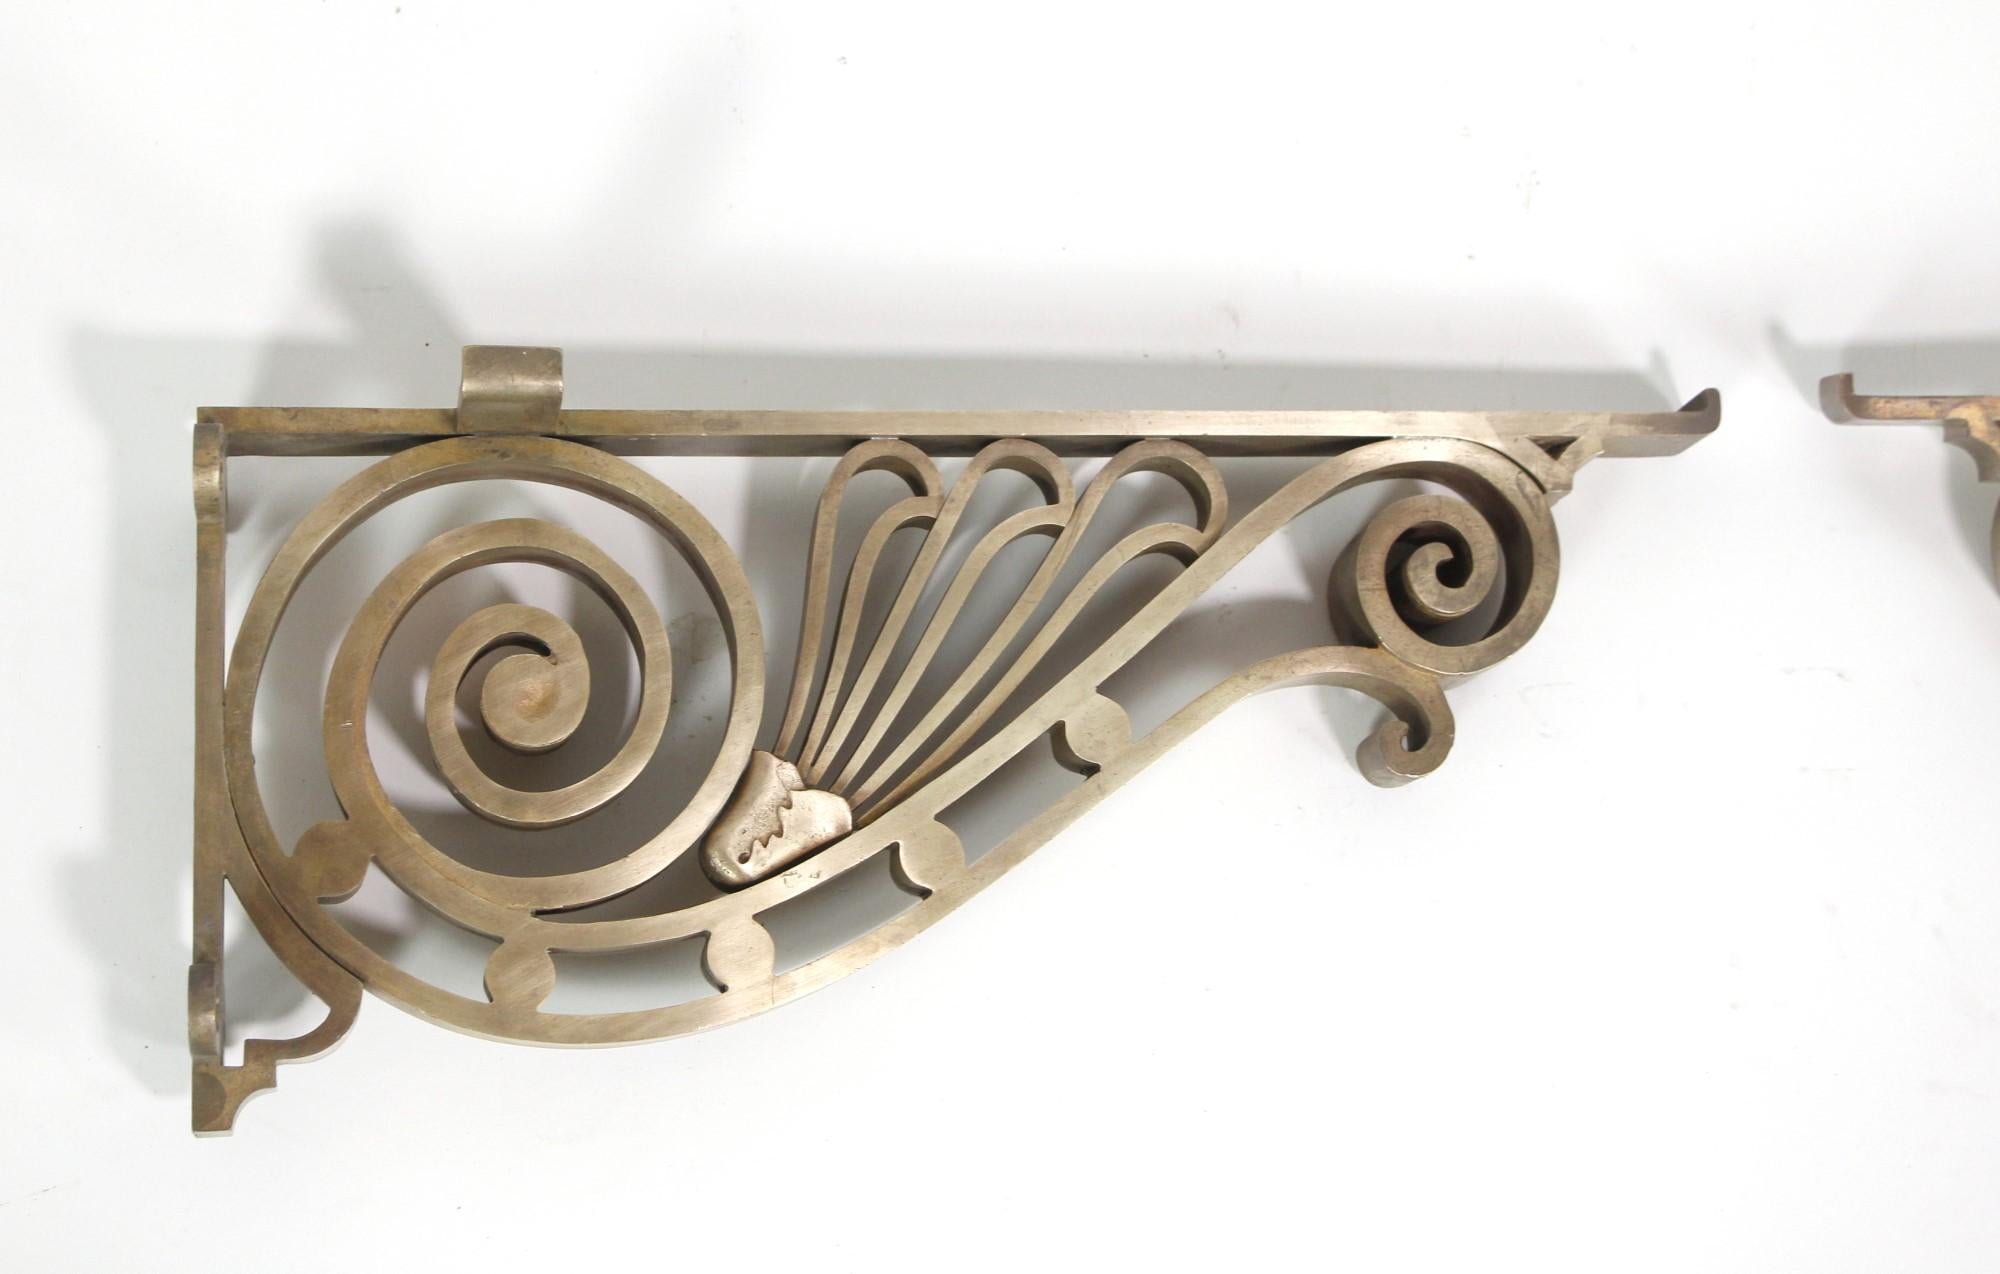 Early 20th Century Art Nouveau cast bronze brackets featuring a polished finish. Spiral design enhancement the beauty and strength of these antique brackets. Priced as a pair. Please note, this item is located in one of our NYC locations.